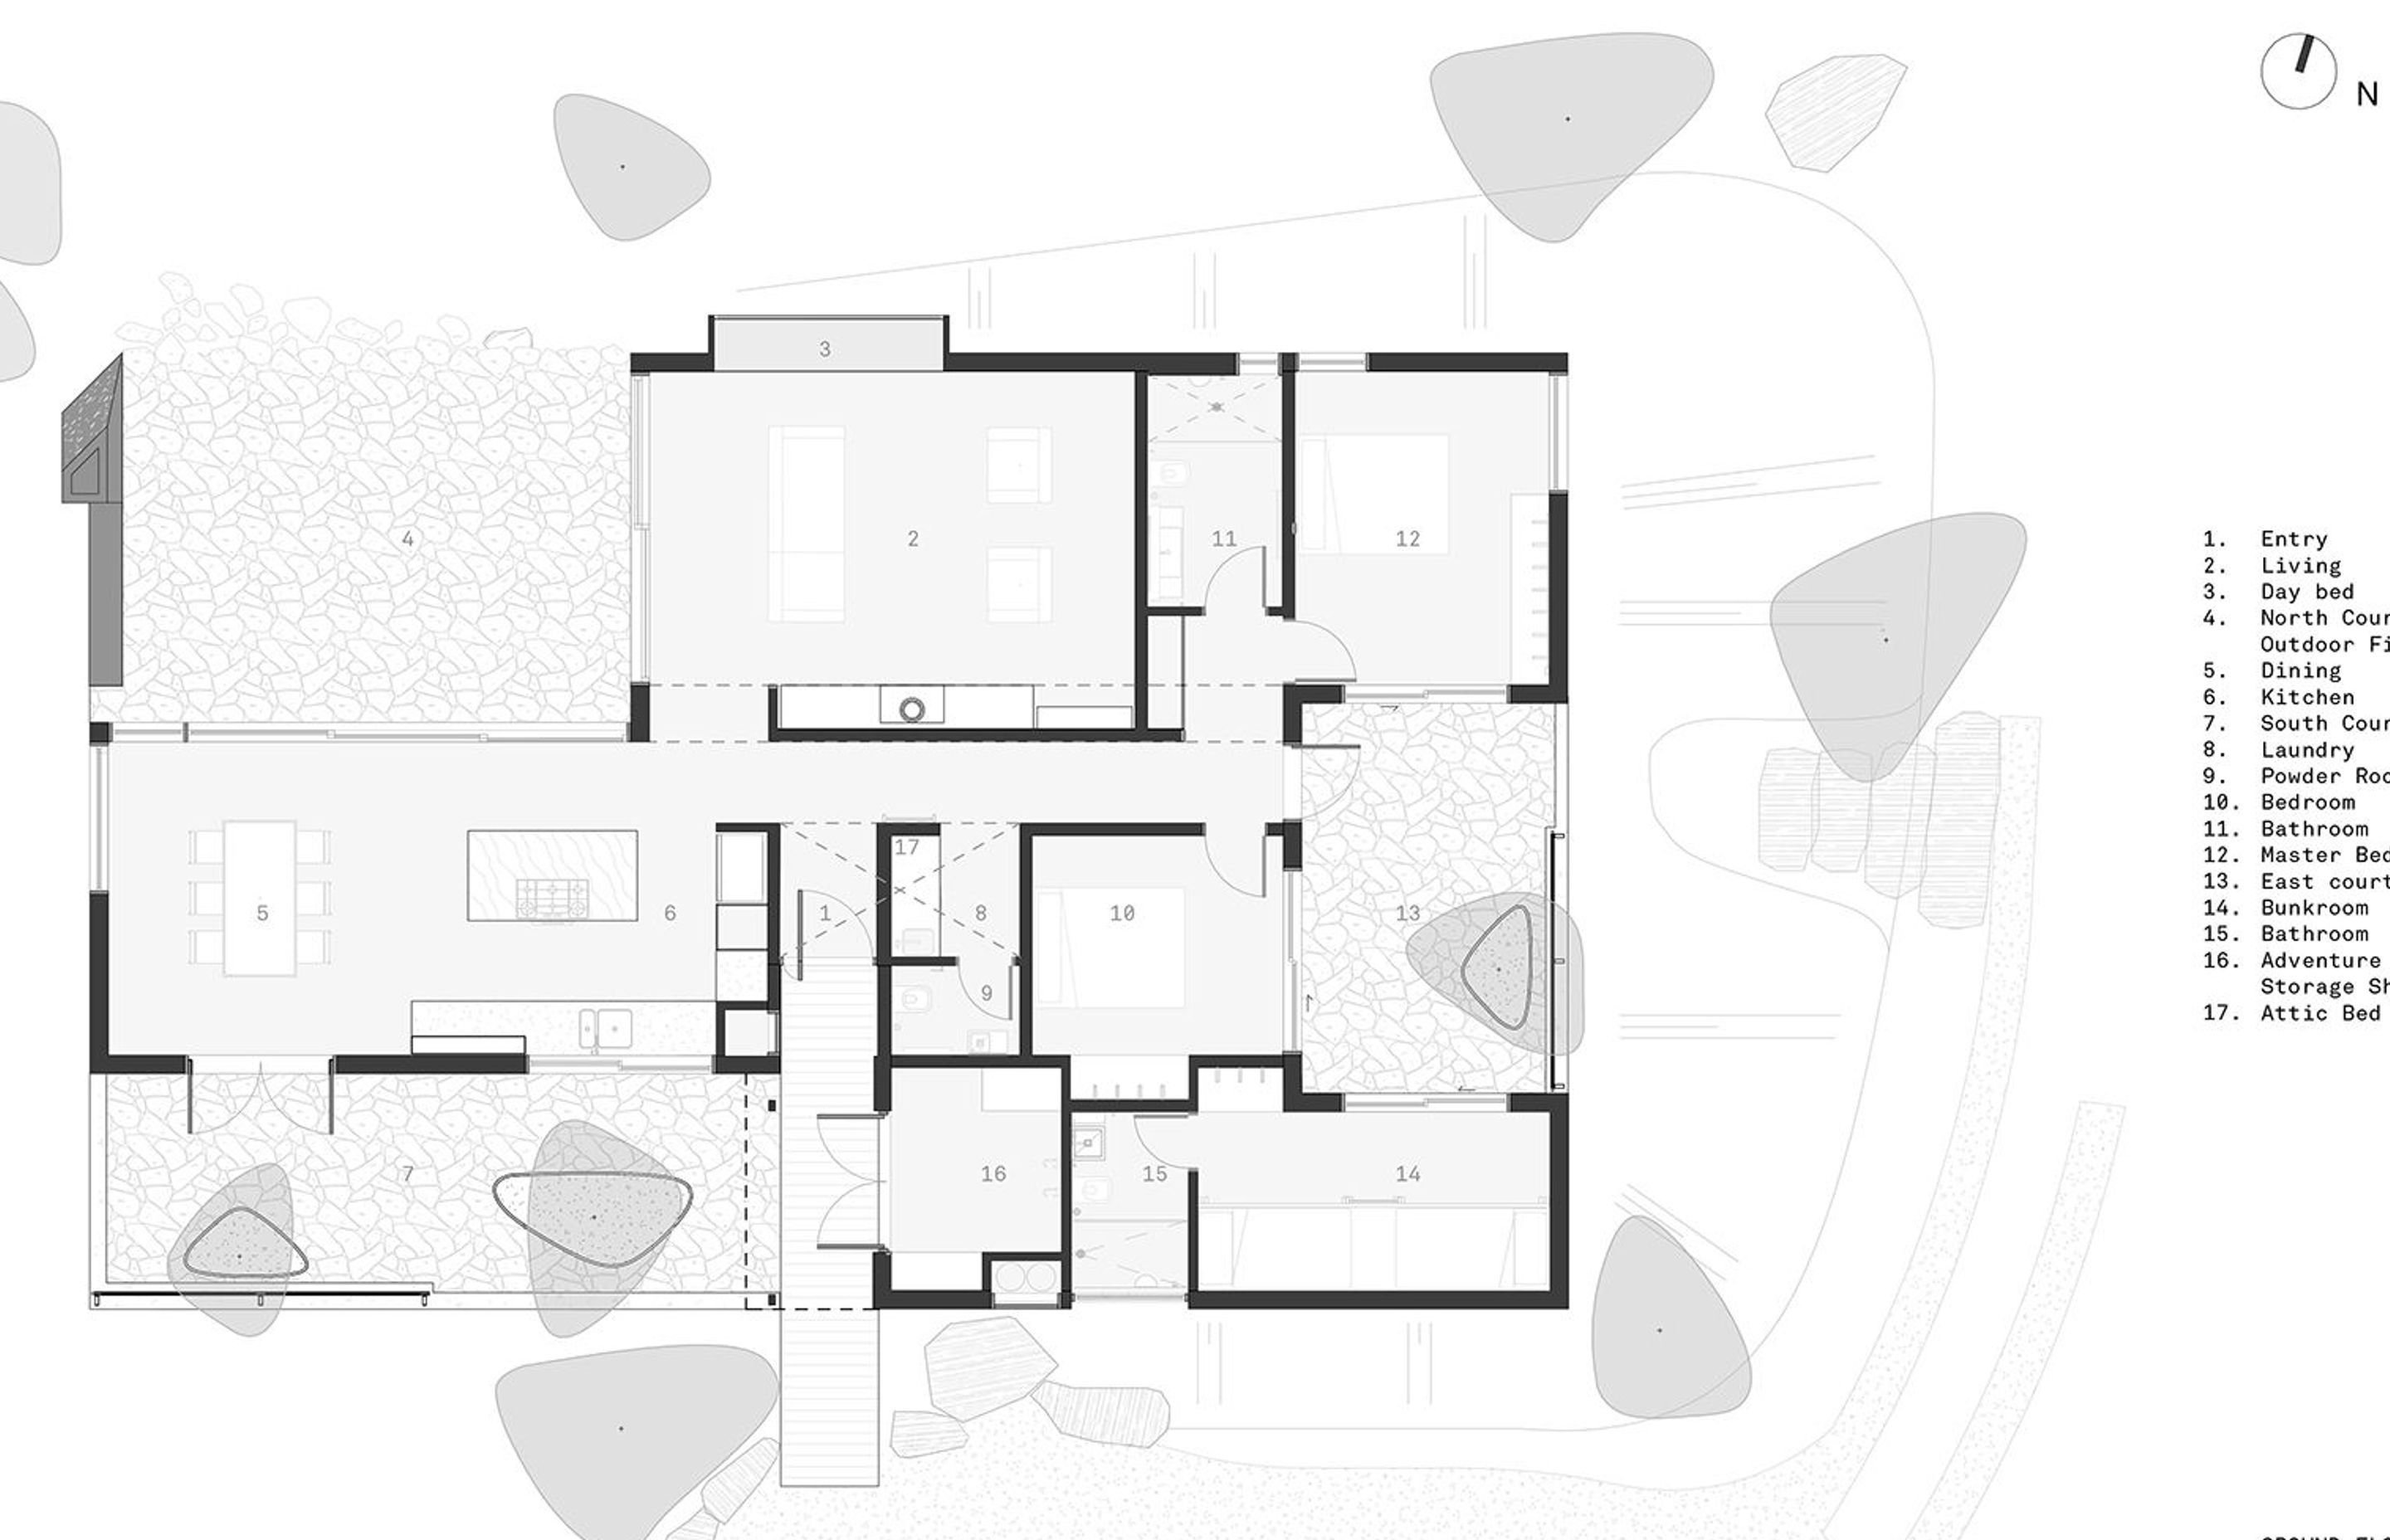 The ground-floor plan of Wanaka Crib by PAC Studio and Steven Lloyd Architecture.